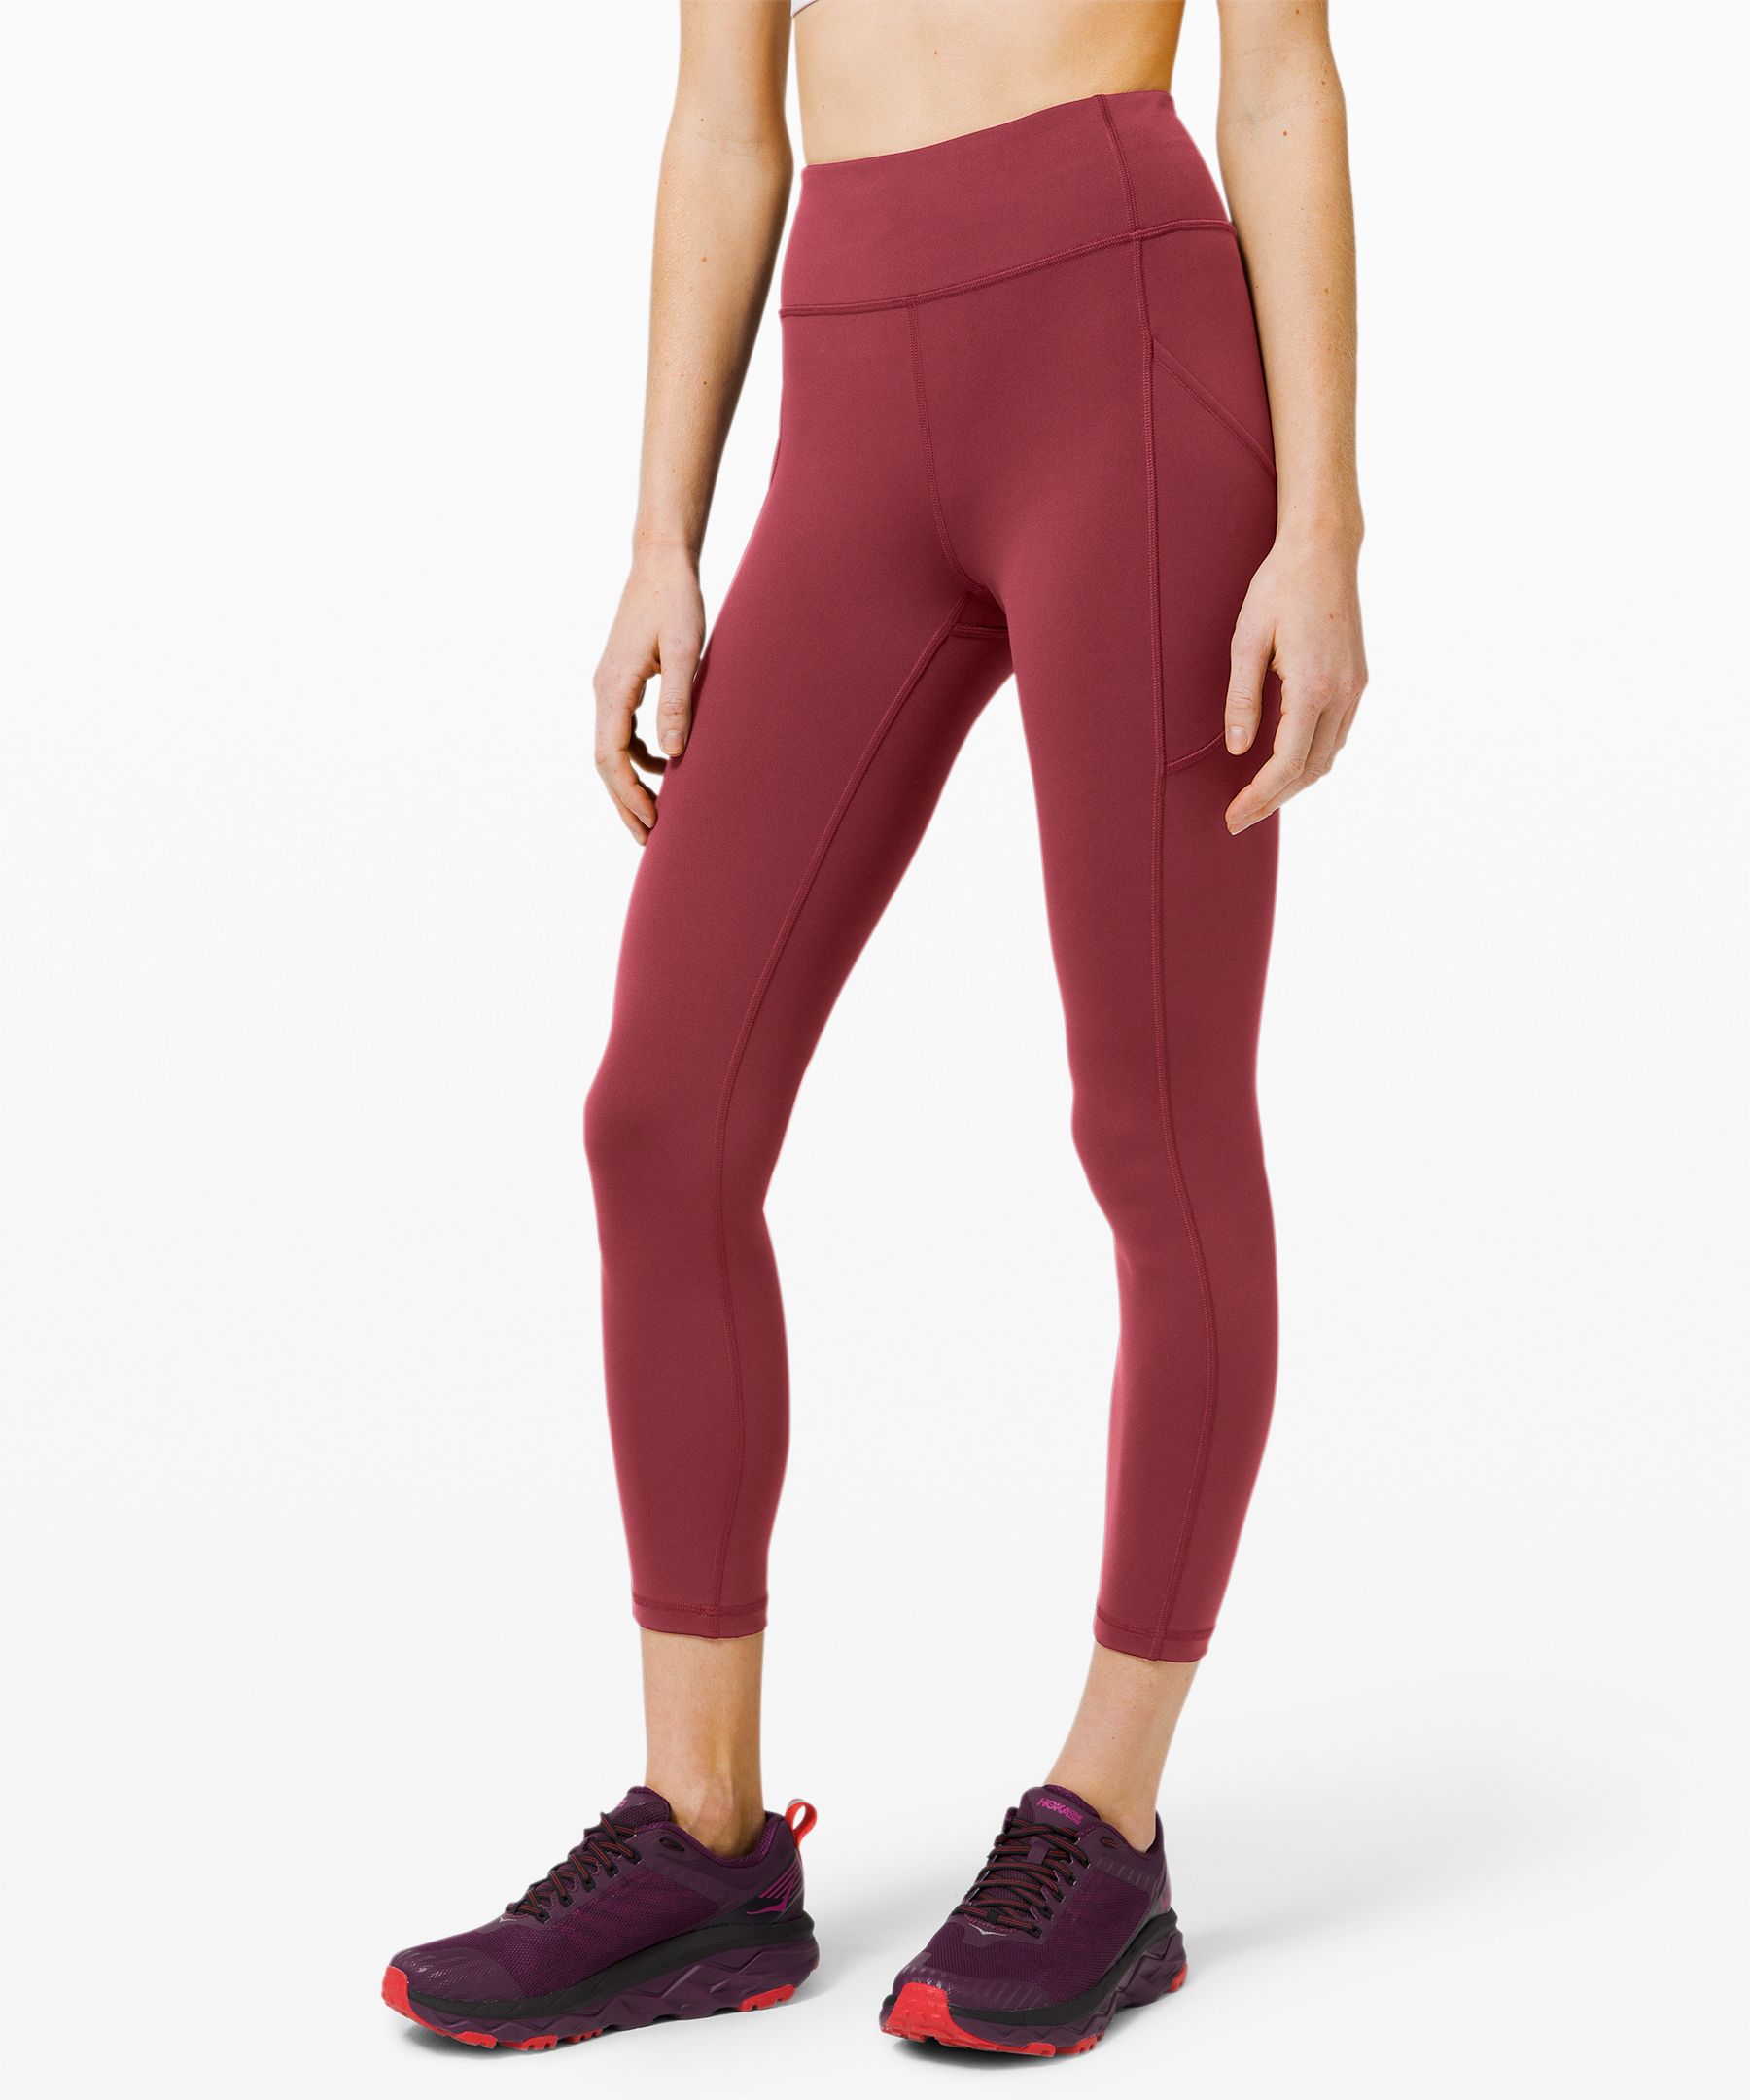 Lululemon Invigourate High-Rise Tight Review, 2021